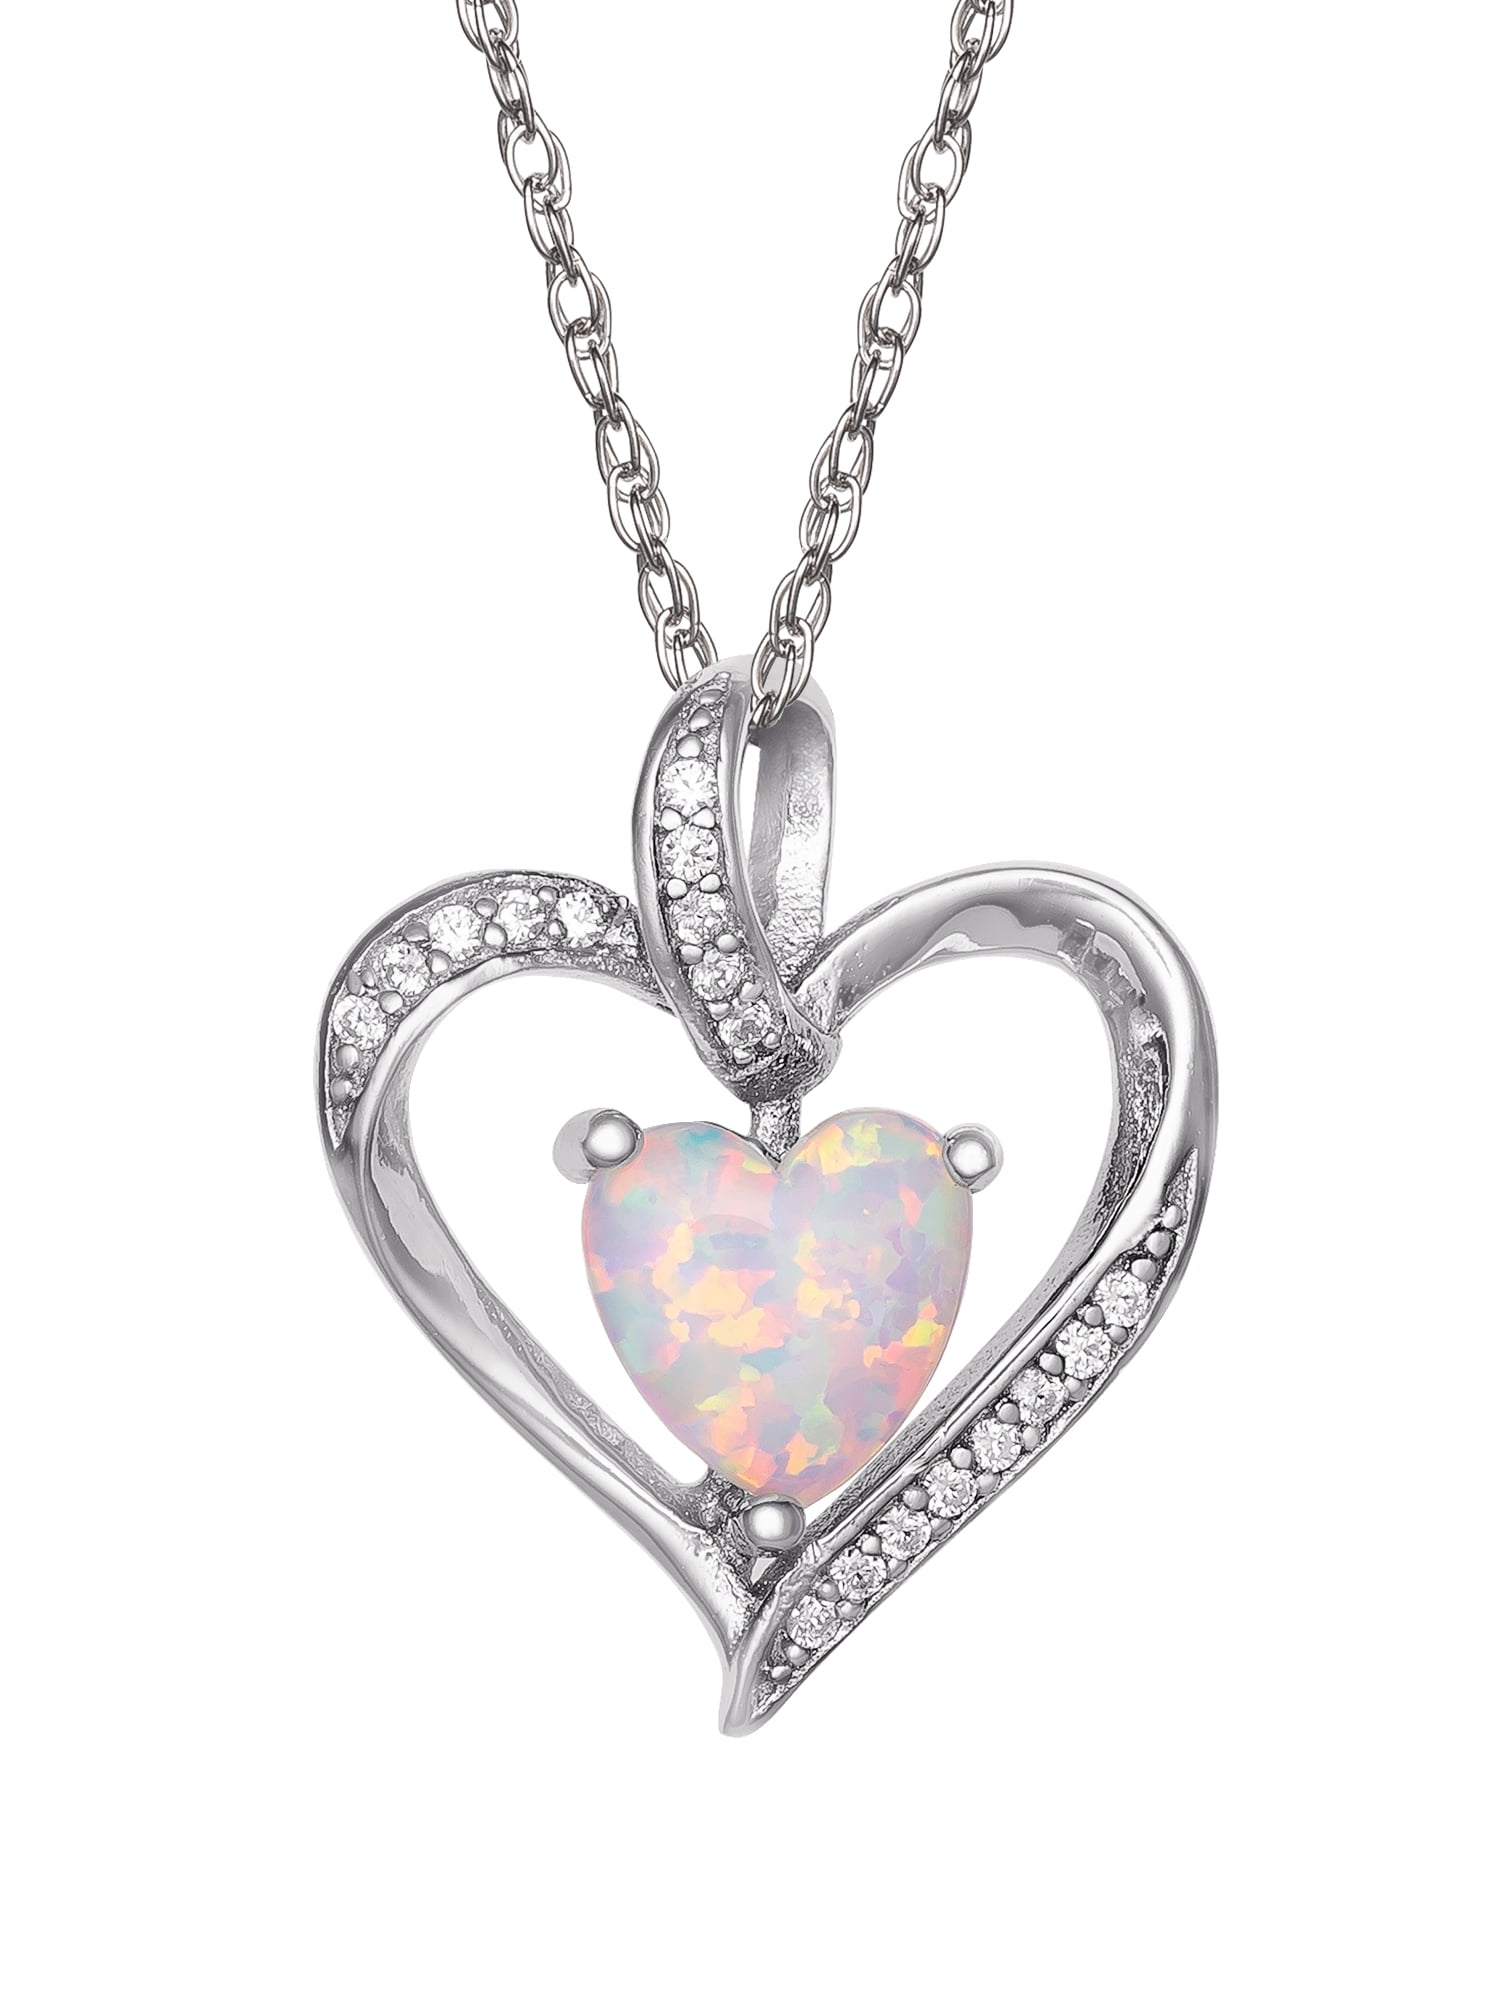 Sutyle Heart Shape Cubic Zirconia Pendant Necklace with Sterling Silver Box Chain Necklaces for Women